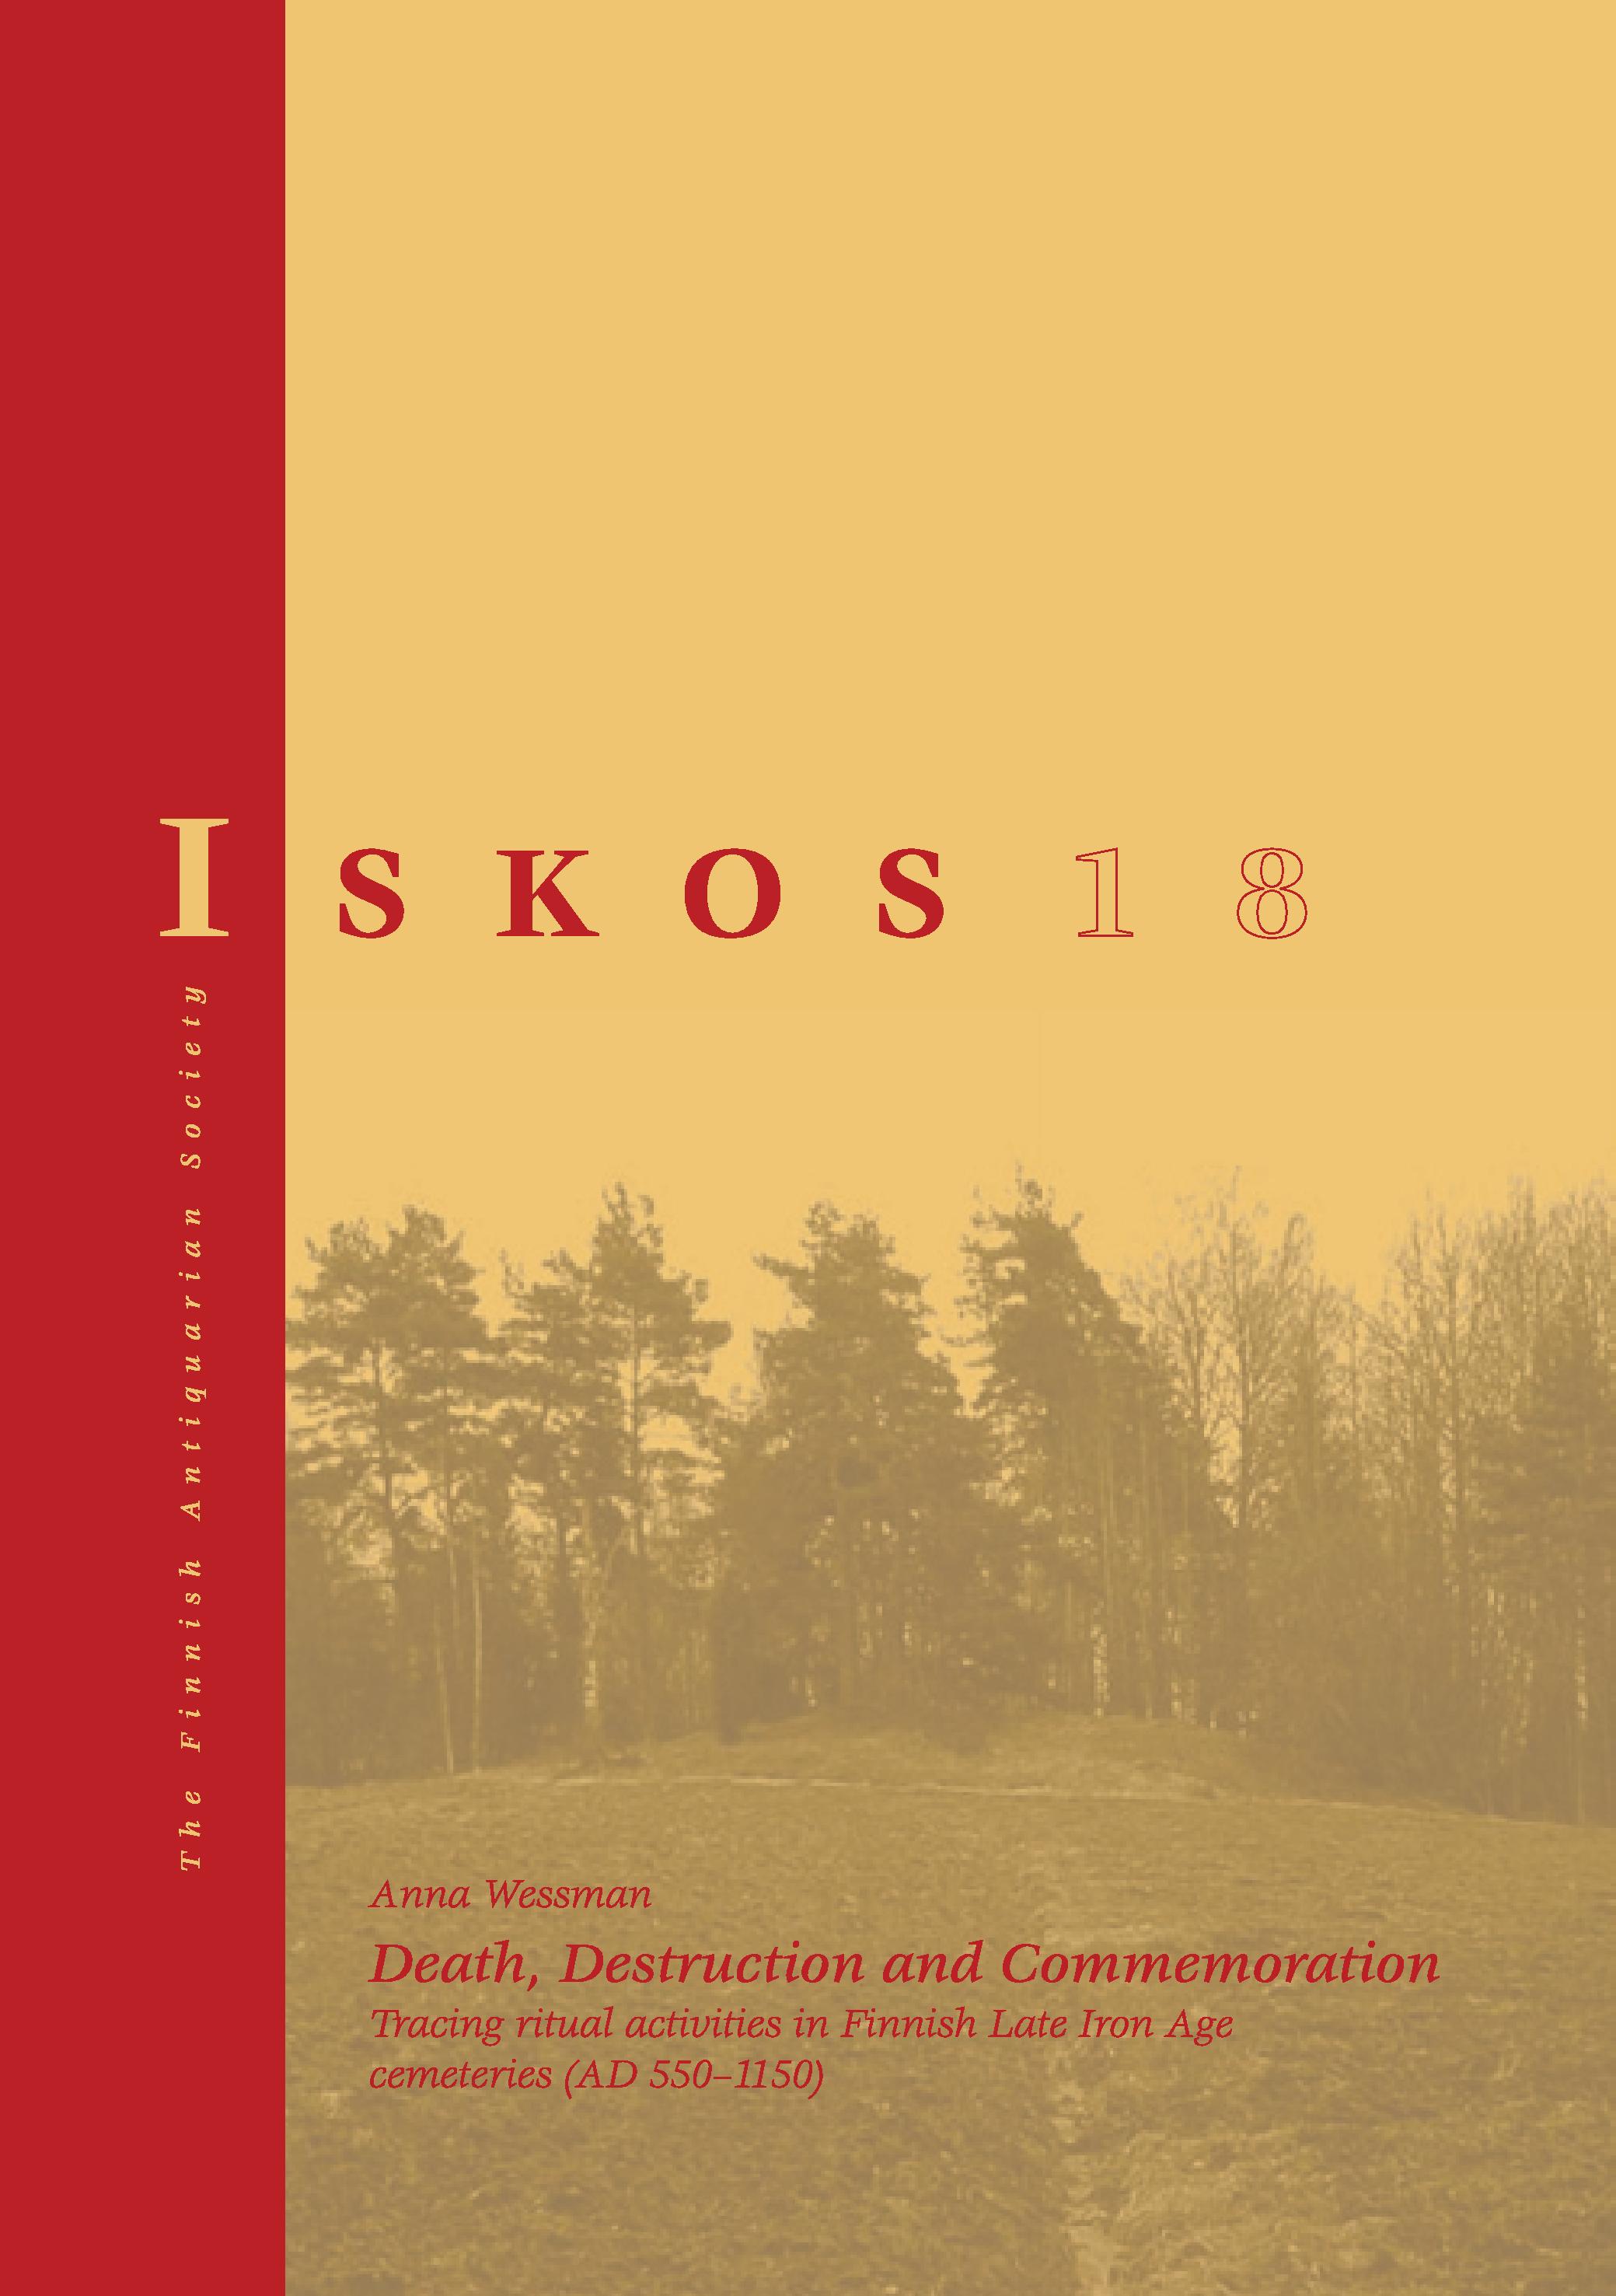 					View Vol. 18 (2010): Death, Destruction and Commemoration: Tracing ritual activities in Finnish Late Iron Age cemeteries (AD 550-1150)
				